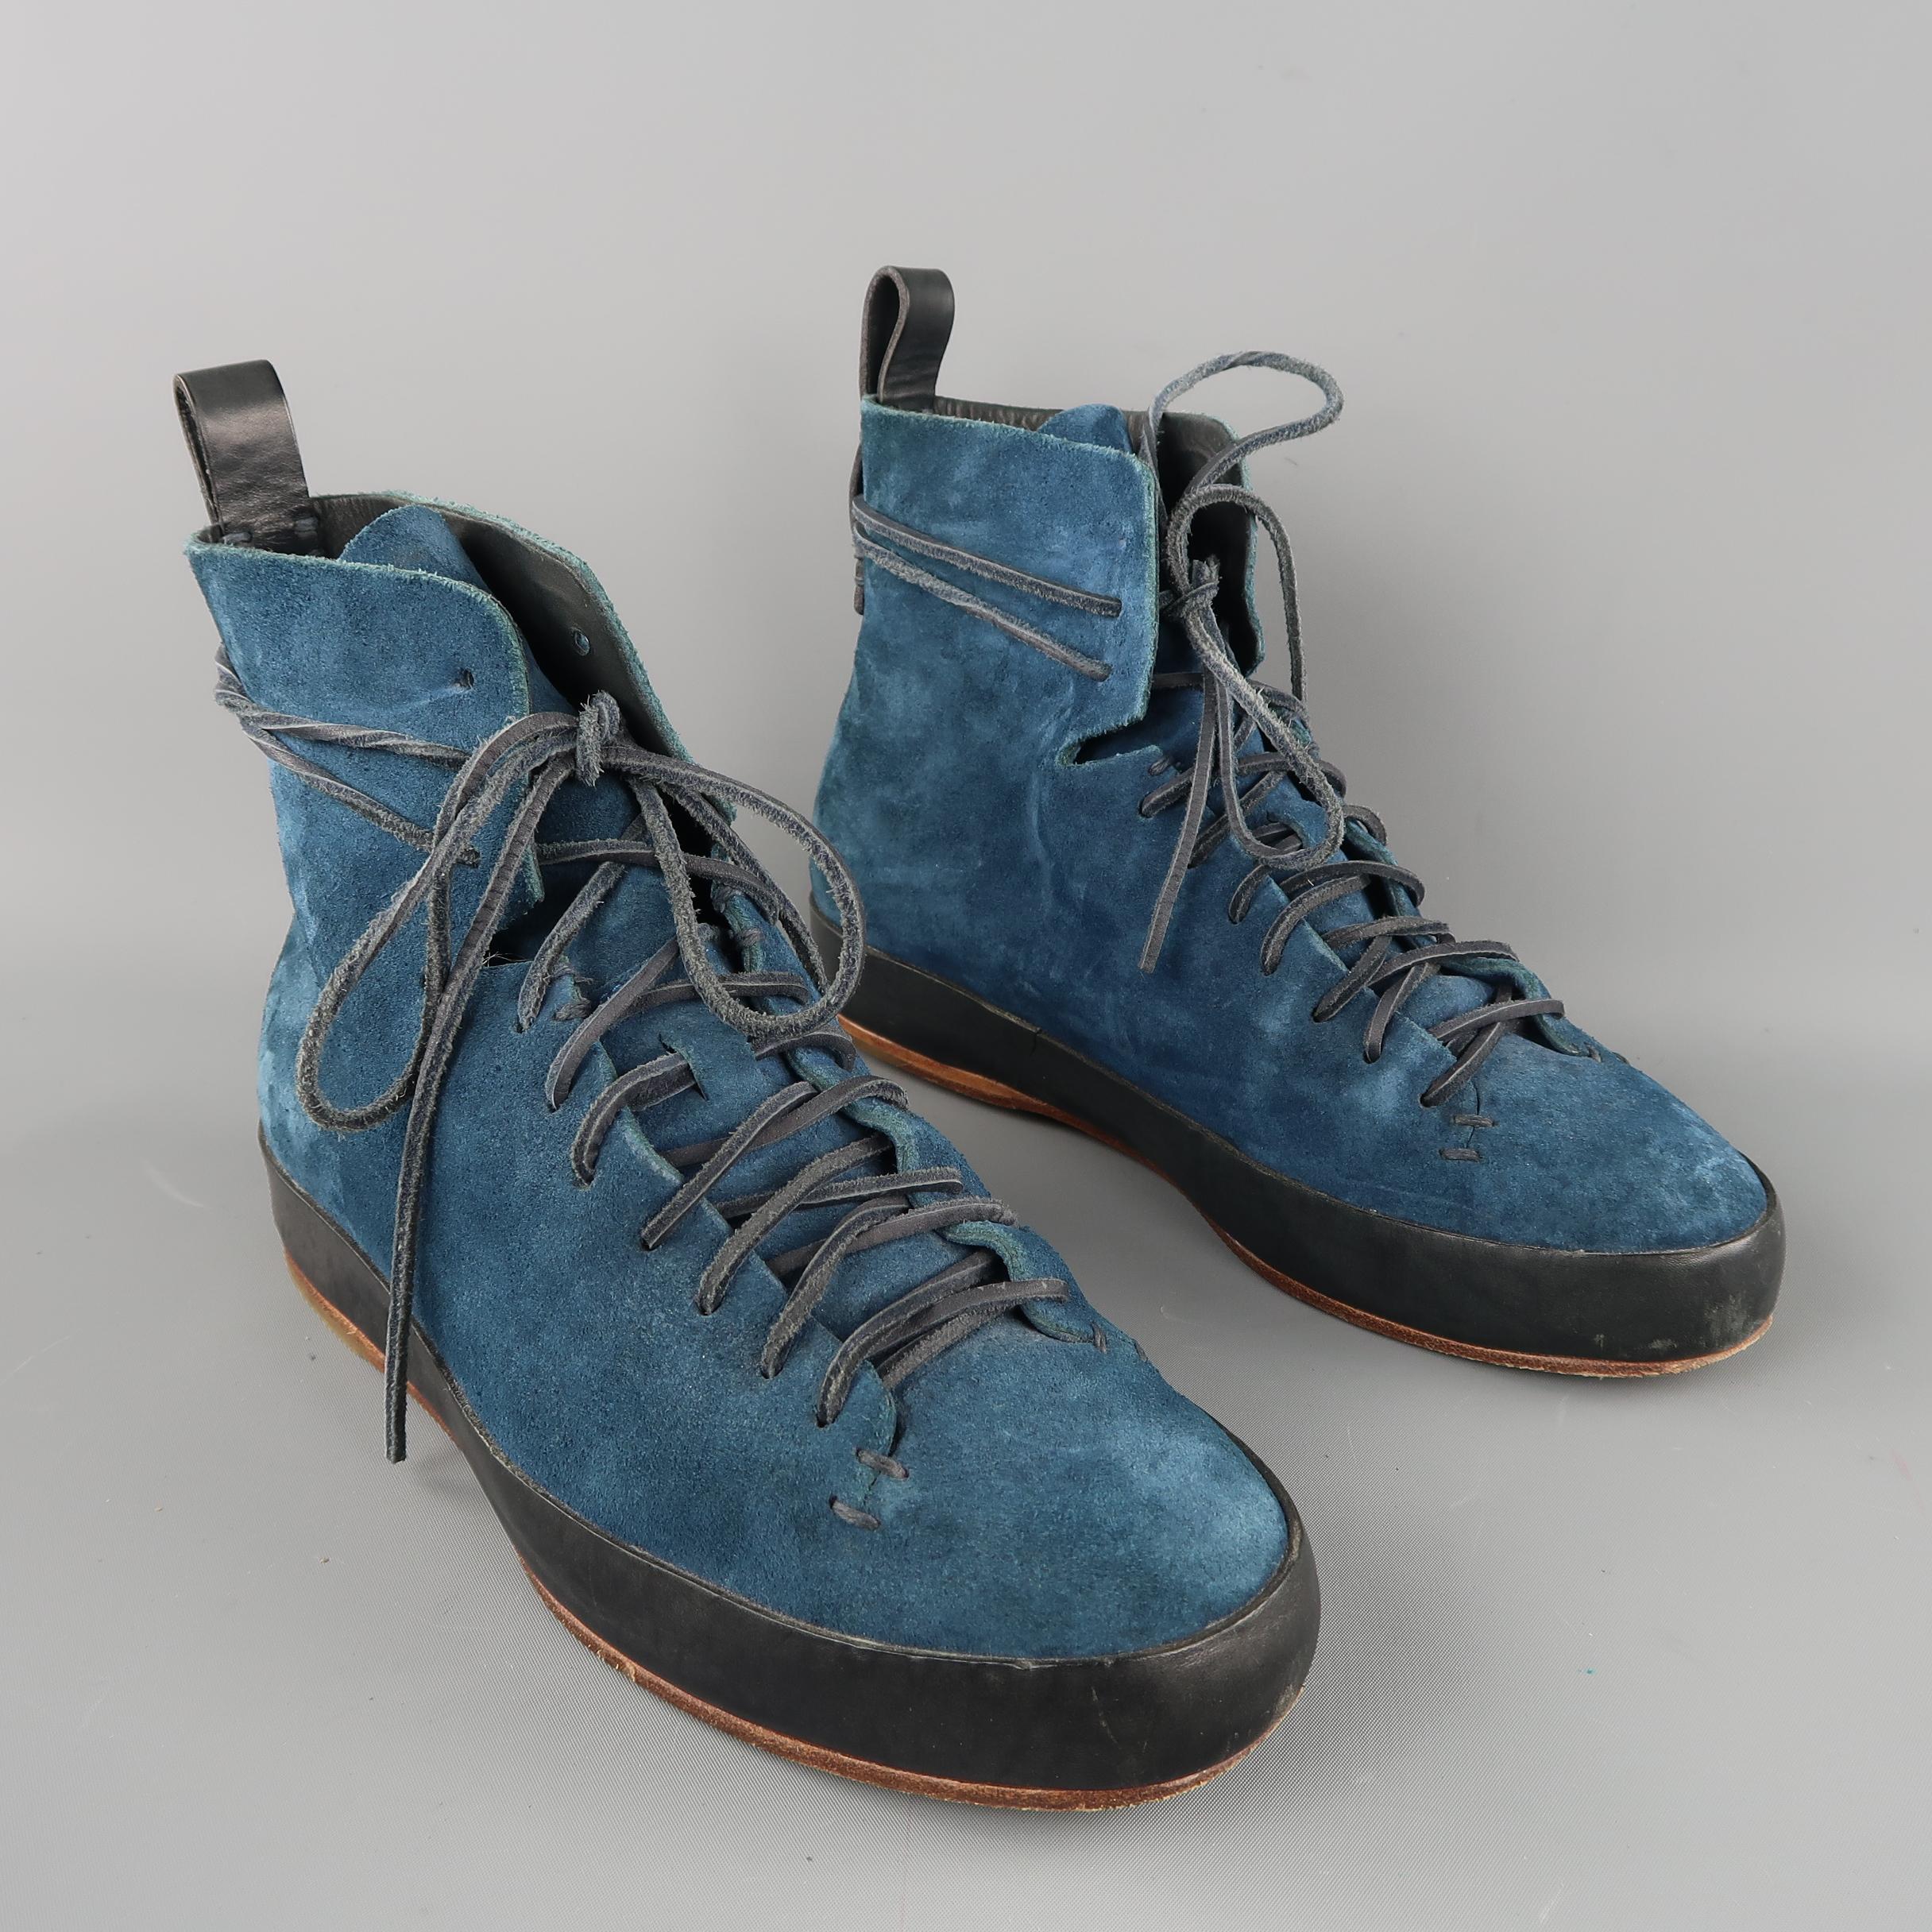 FEIT boots are in blue solid suede, featuring black leather detail on the back, lace up. Minor wear.
 
Excellent  Pre-Owned Condition
Marked: 43
 
Measurements:
Outsole: 11.5 x 2.5 in.